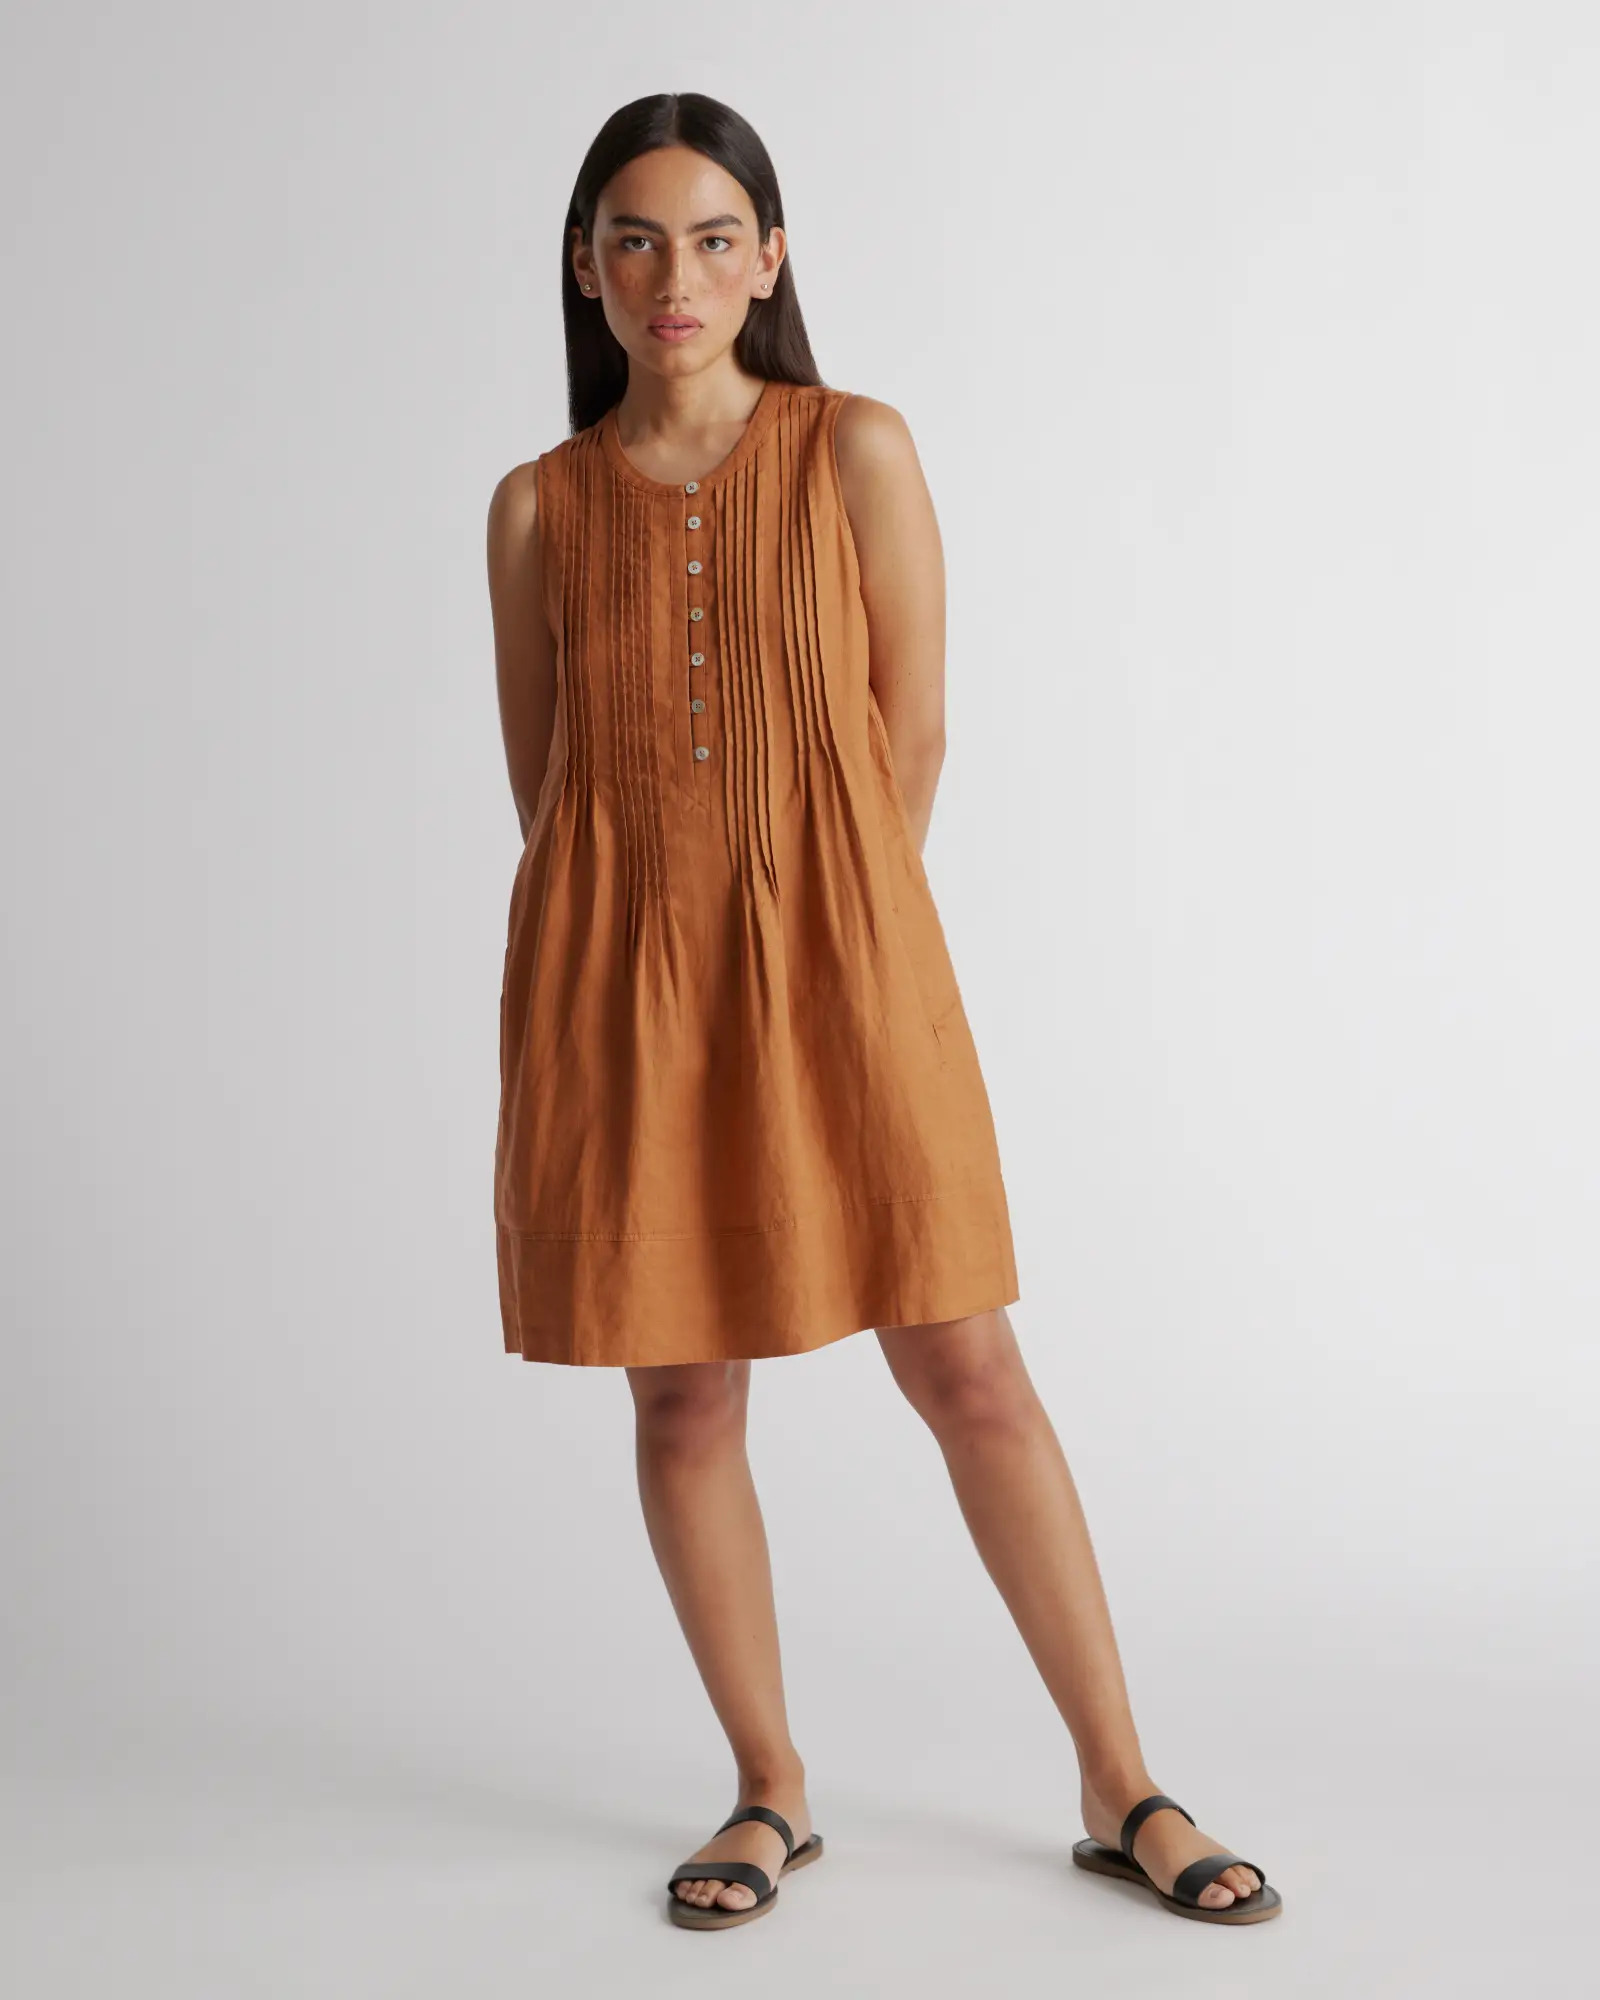 Shop Quince Linen Clothing if You Have Eczema